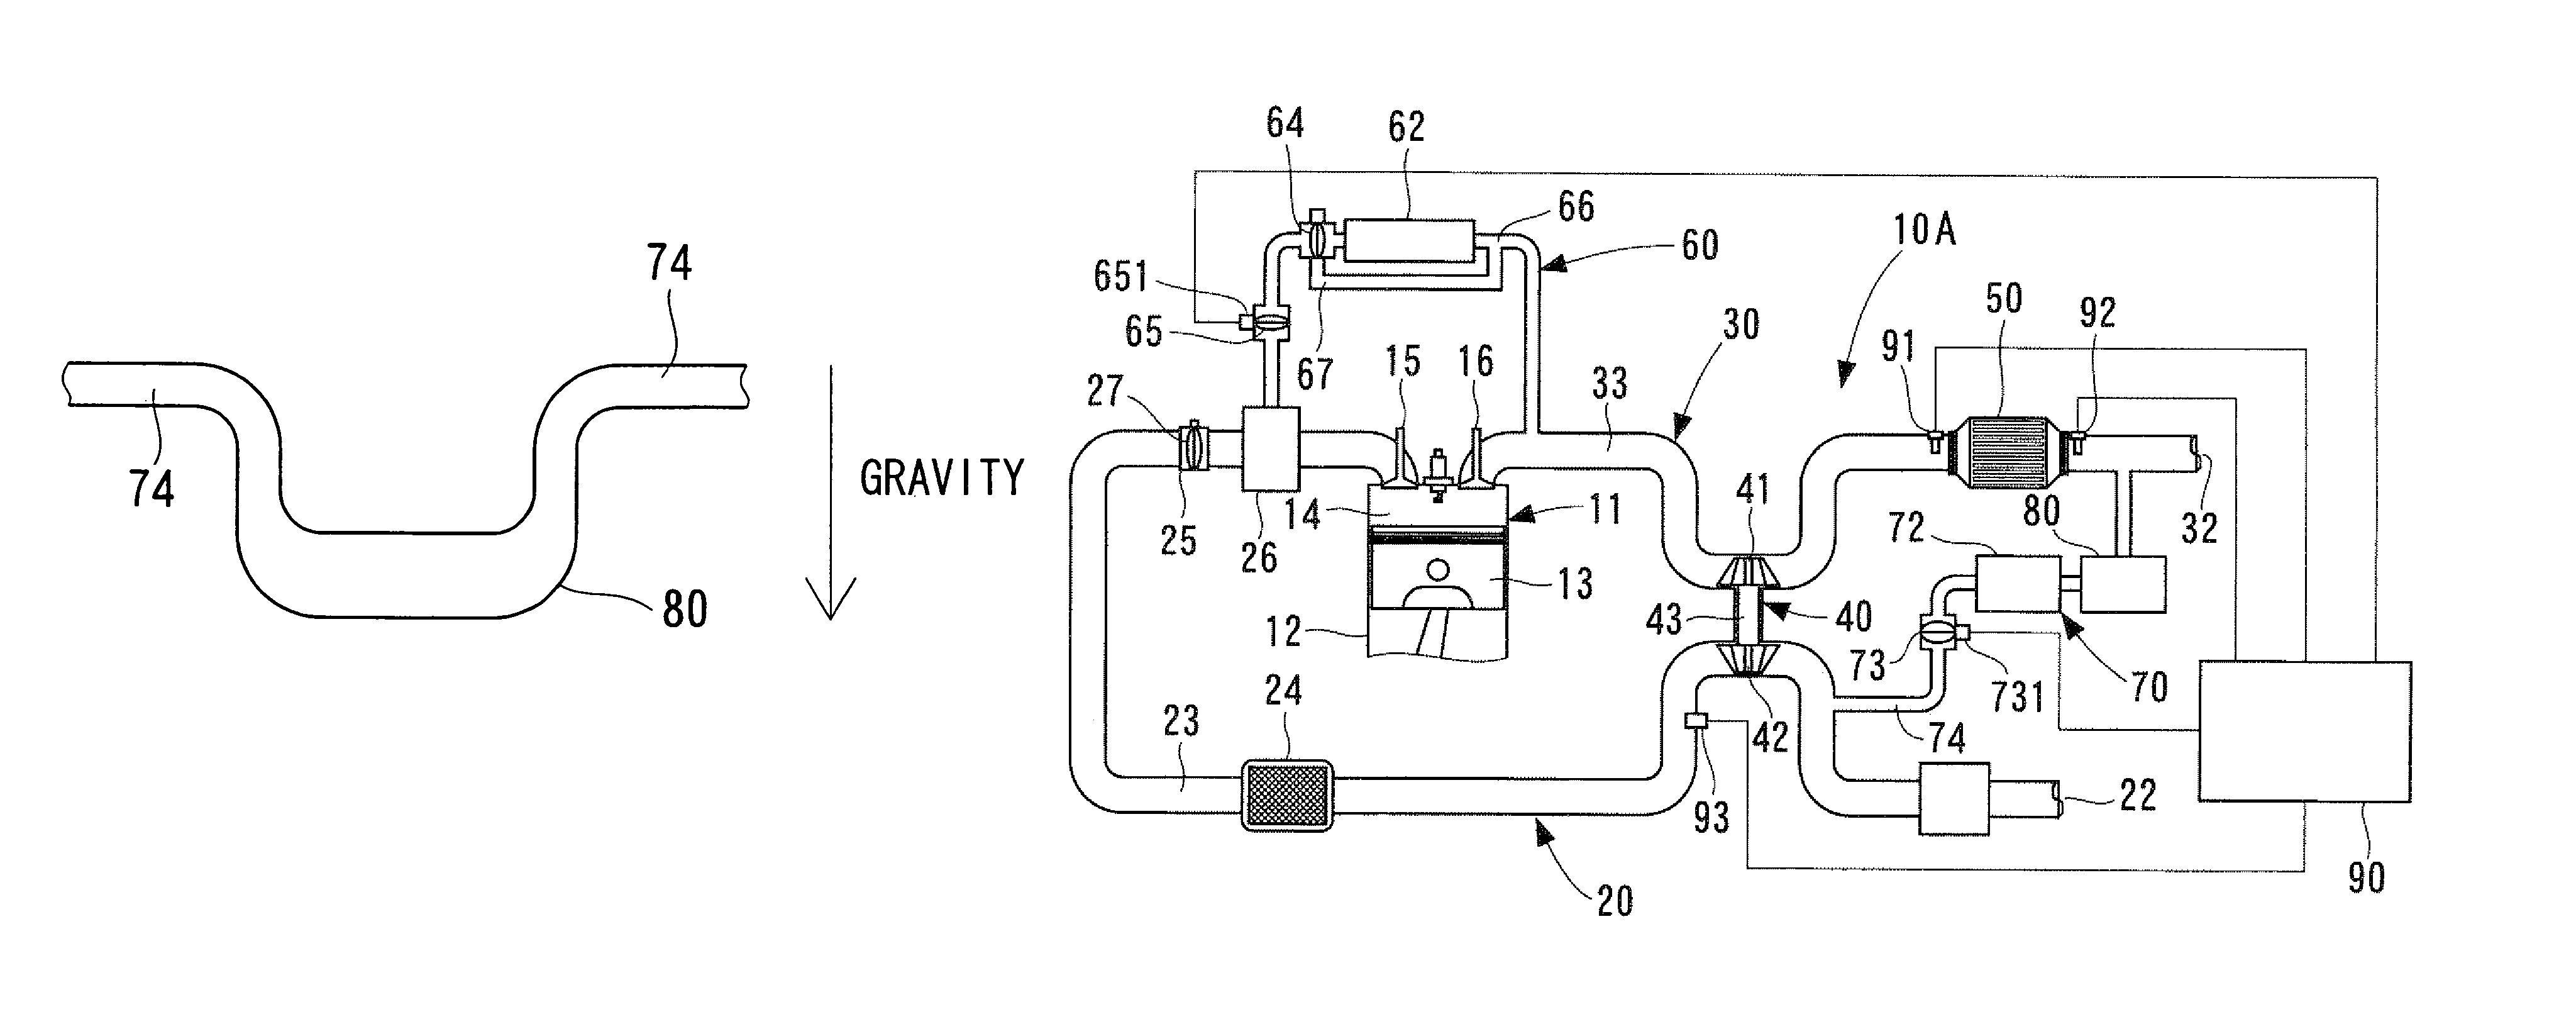 Exhaust gas recirculation system for internal combustion engine